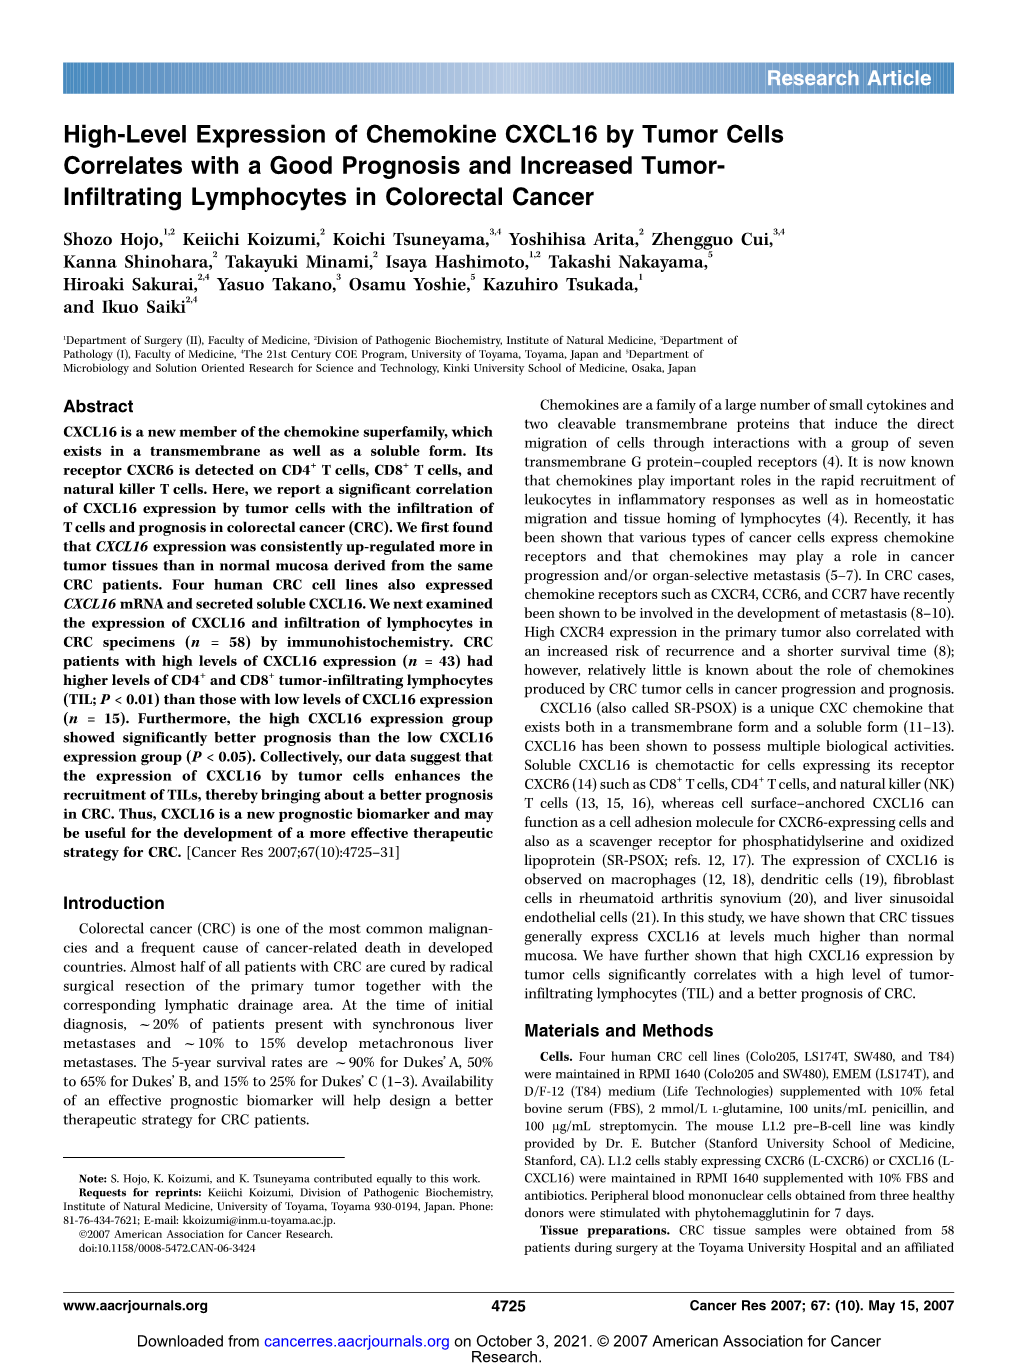 High-Level Expression of Chemokine CXCL16 by Tumor Cells Correlates with a Good Prognosis and Increased Tumor- Infiltrating Lymphocytes in Colorectal Cancer